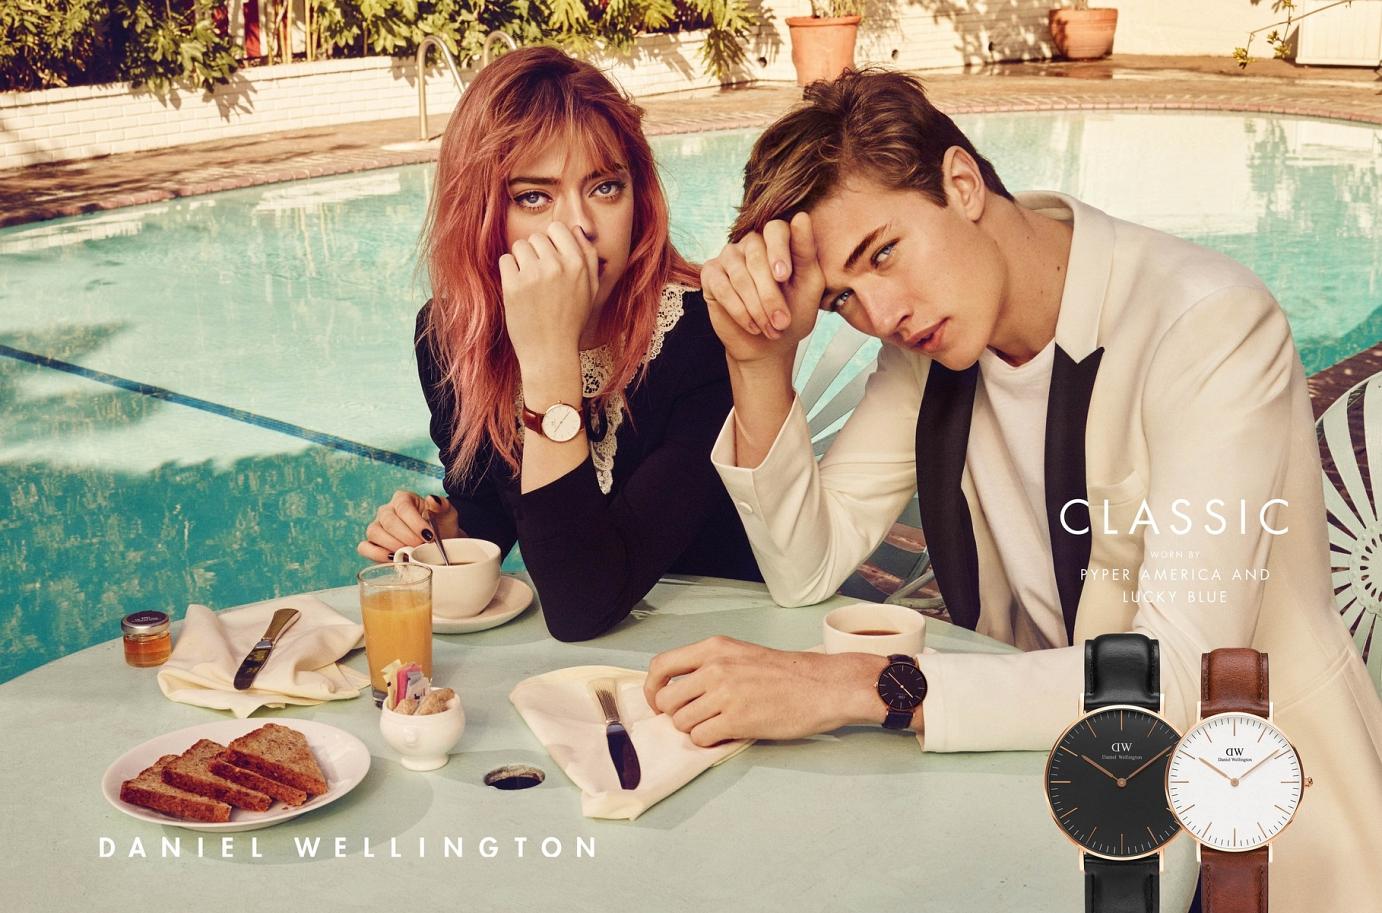 CoqCreative power by ProductionLink s.r.l. Daniel Wellington Daniel-Wellington  Daniel Wellington